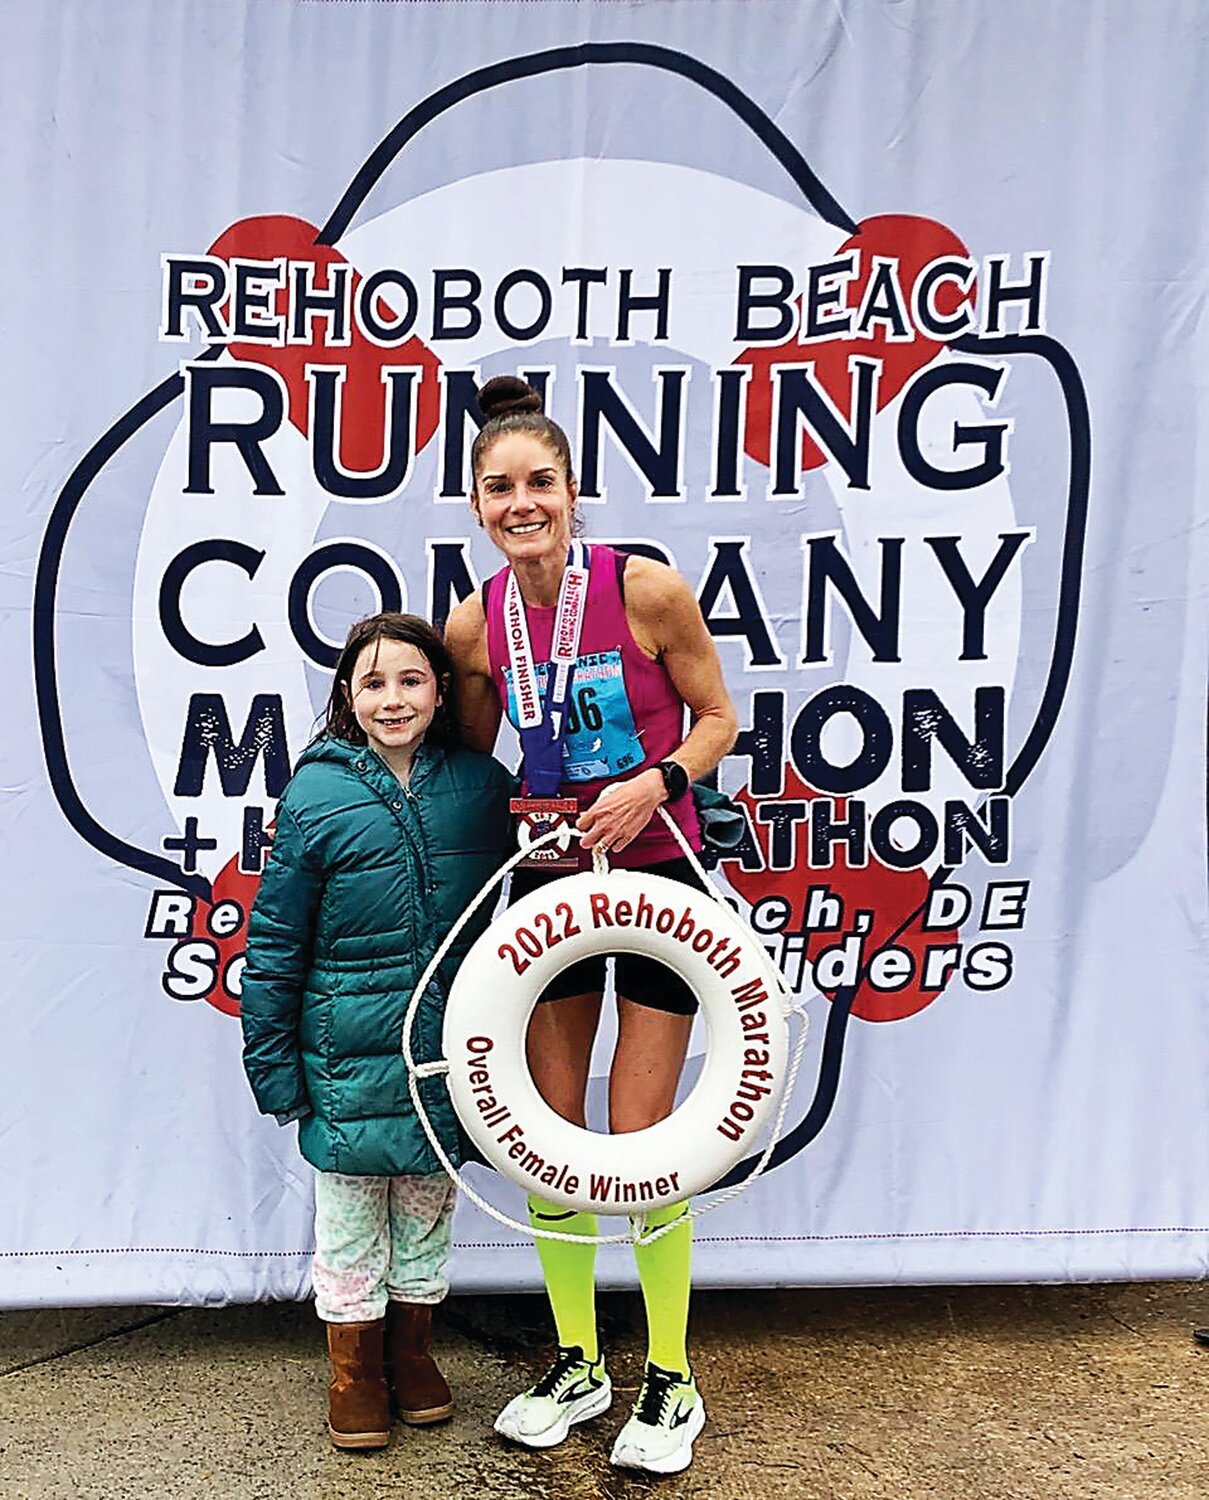 Stephanie Savastano, right, celebrates with her daughter, Meadow, after winning last December's Rehoboth Beach Marathon.